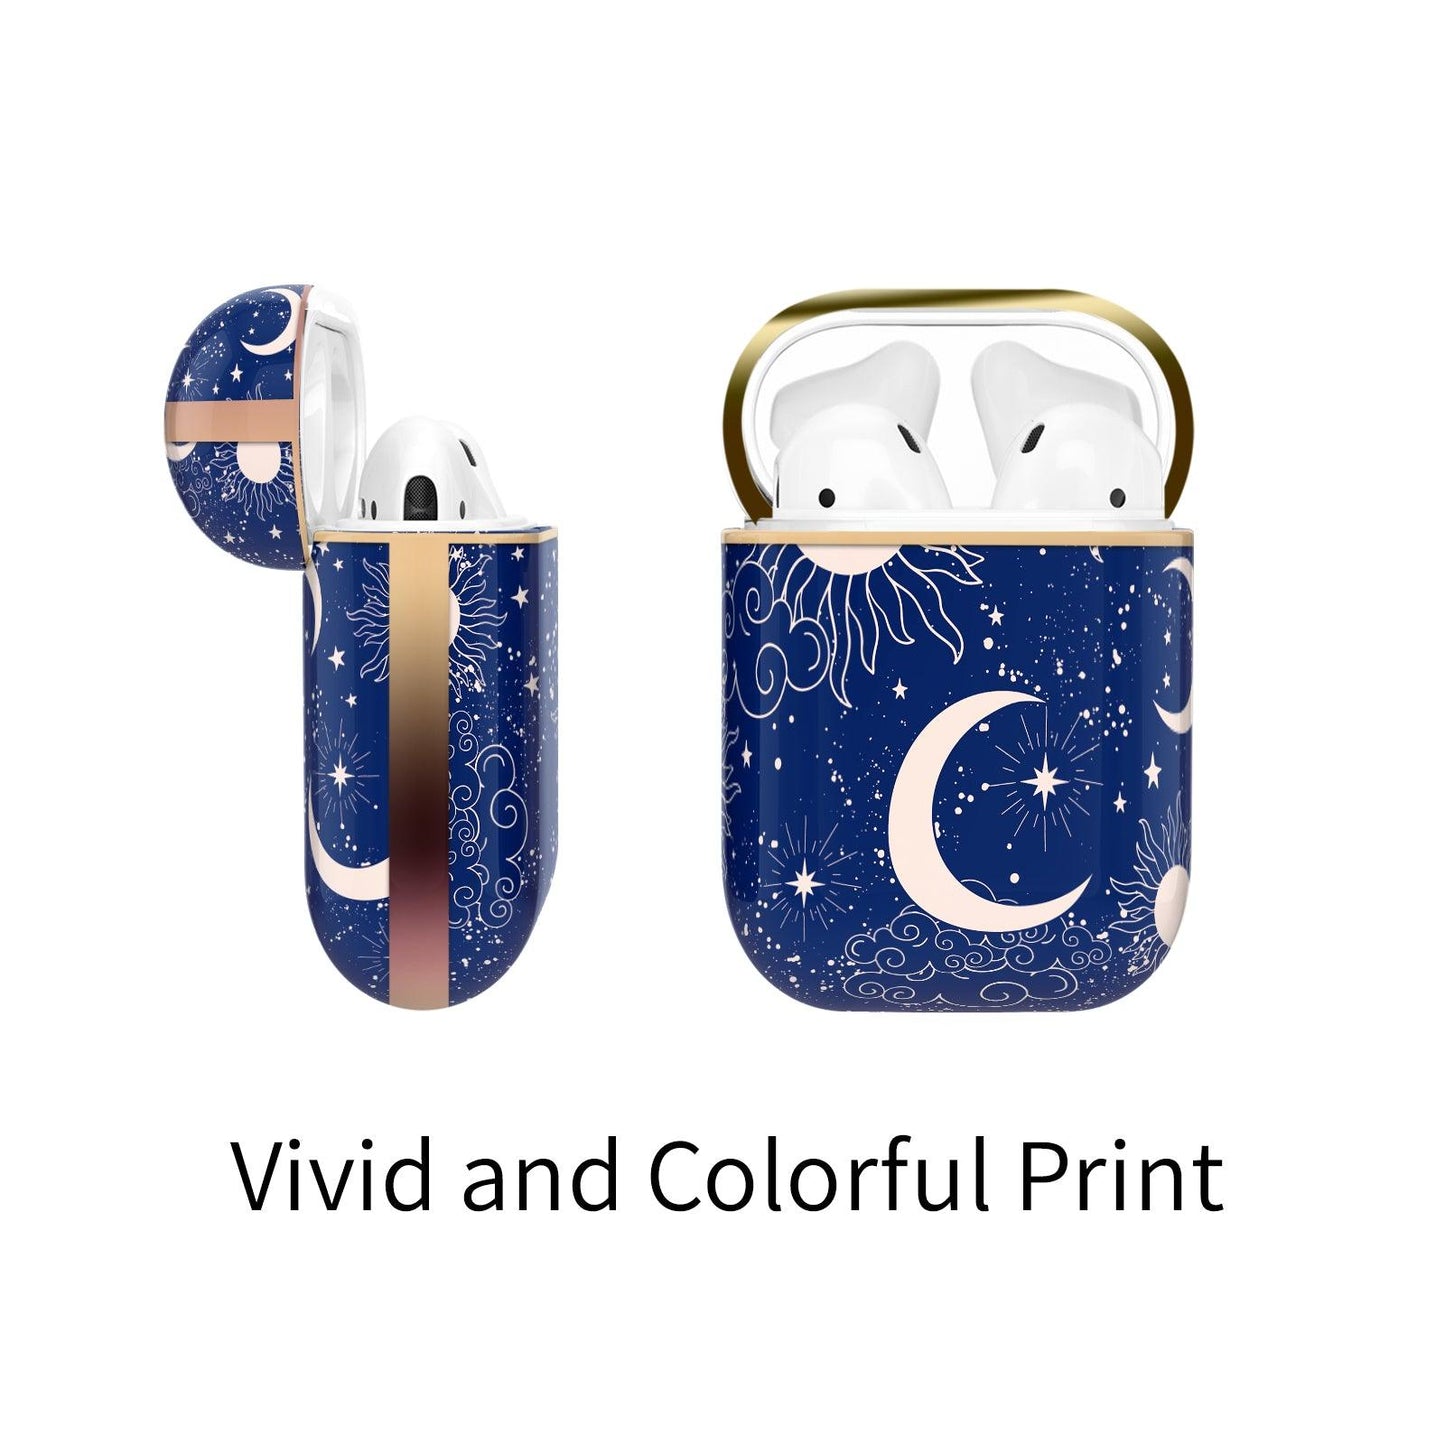 AirPods 1st/ 2nd Generation Contemporary Cover, Sun Crescent and Stars - Berkin Arts